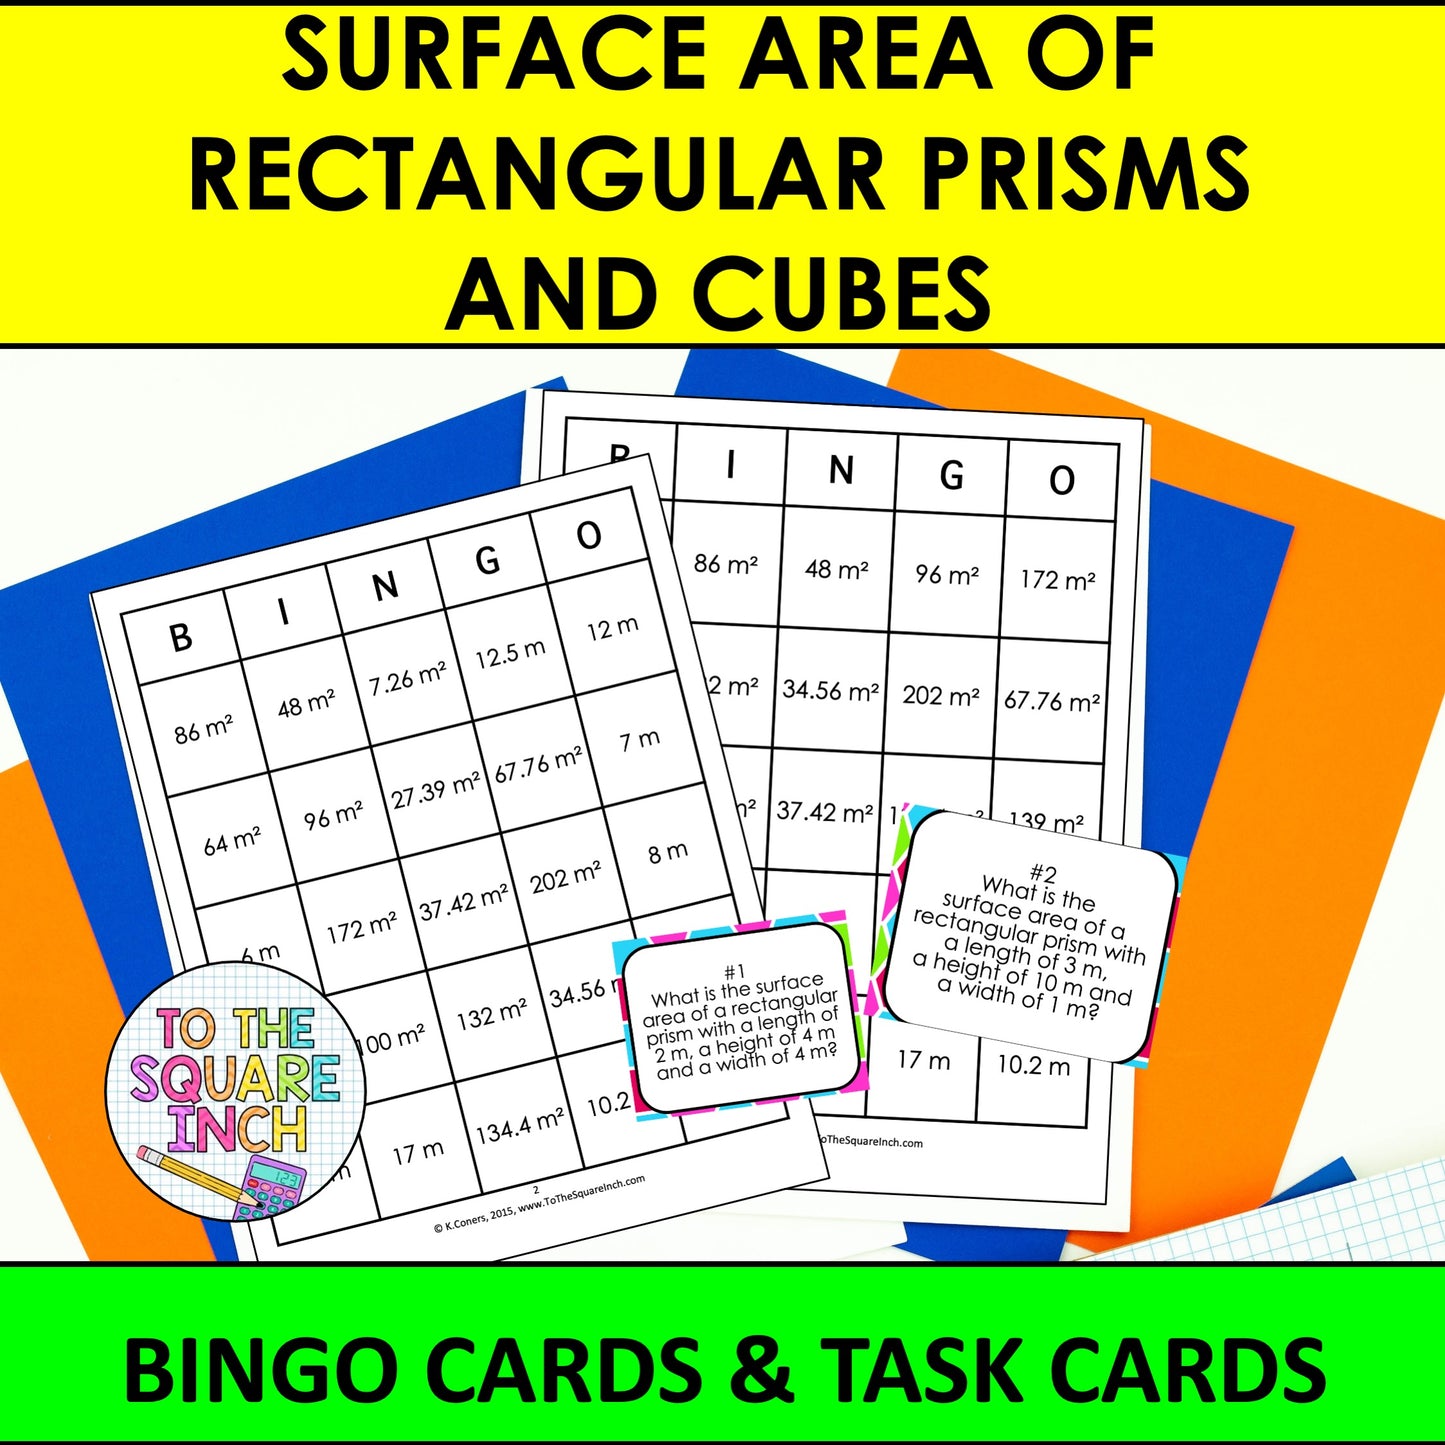 Surface Area of Rectangular Prisms and Cubes Bingo Game